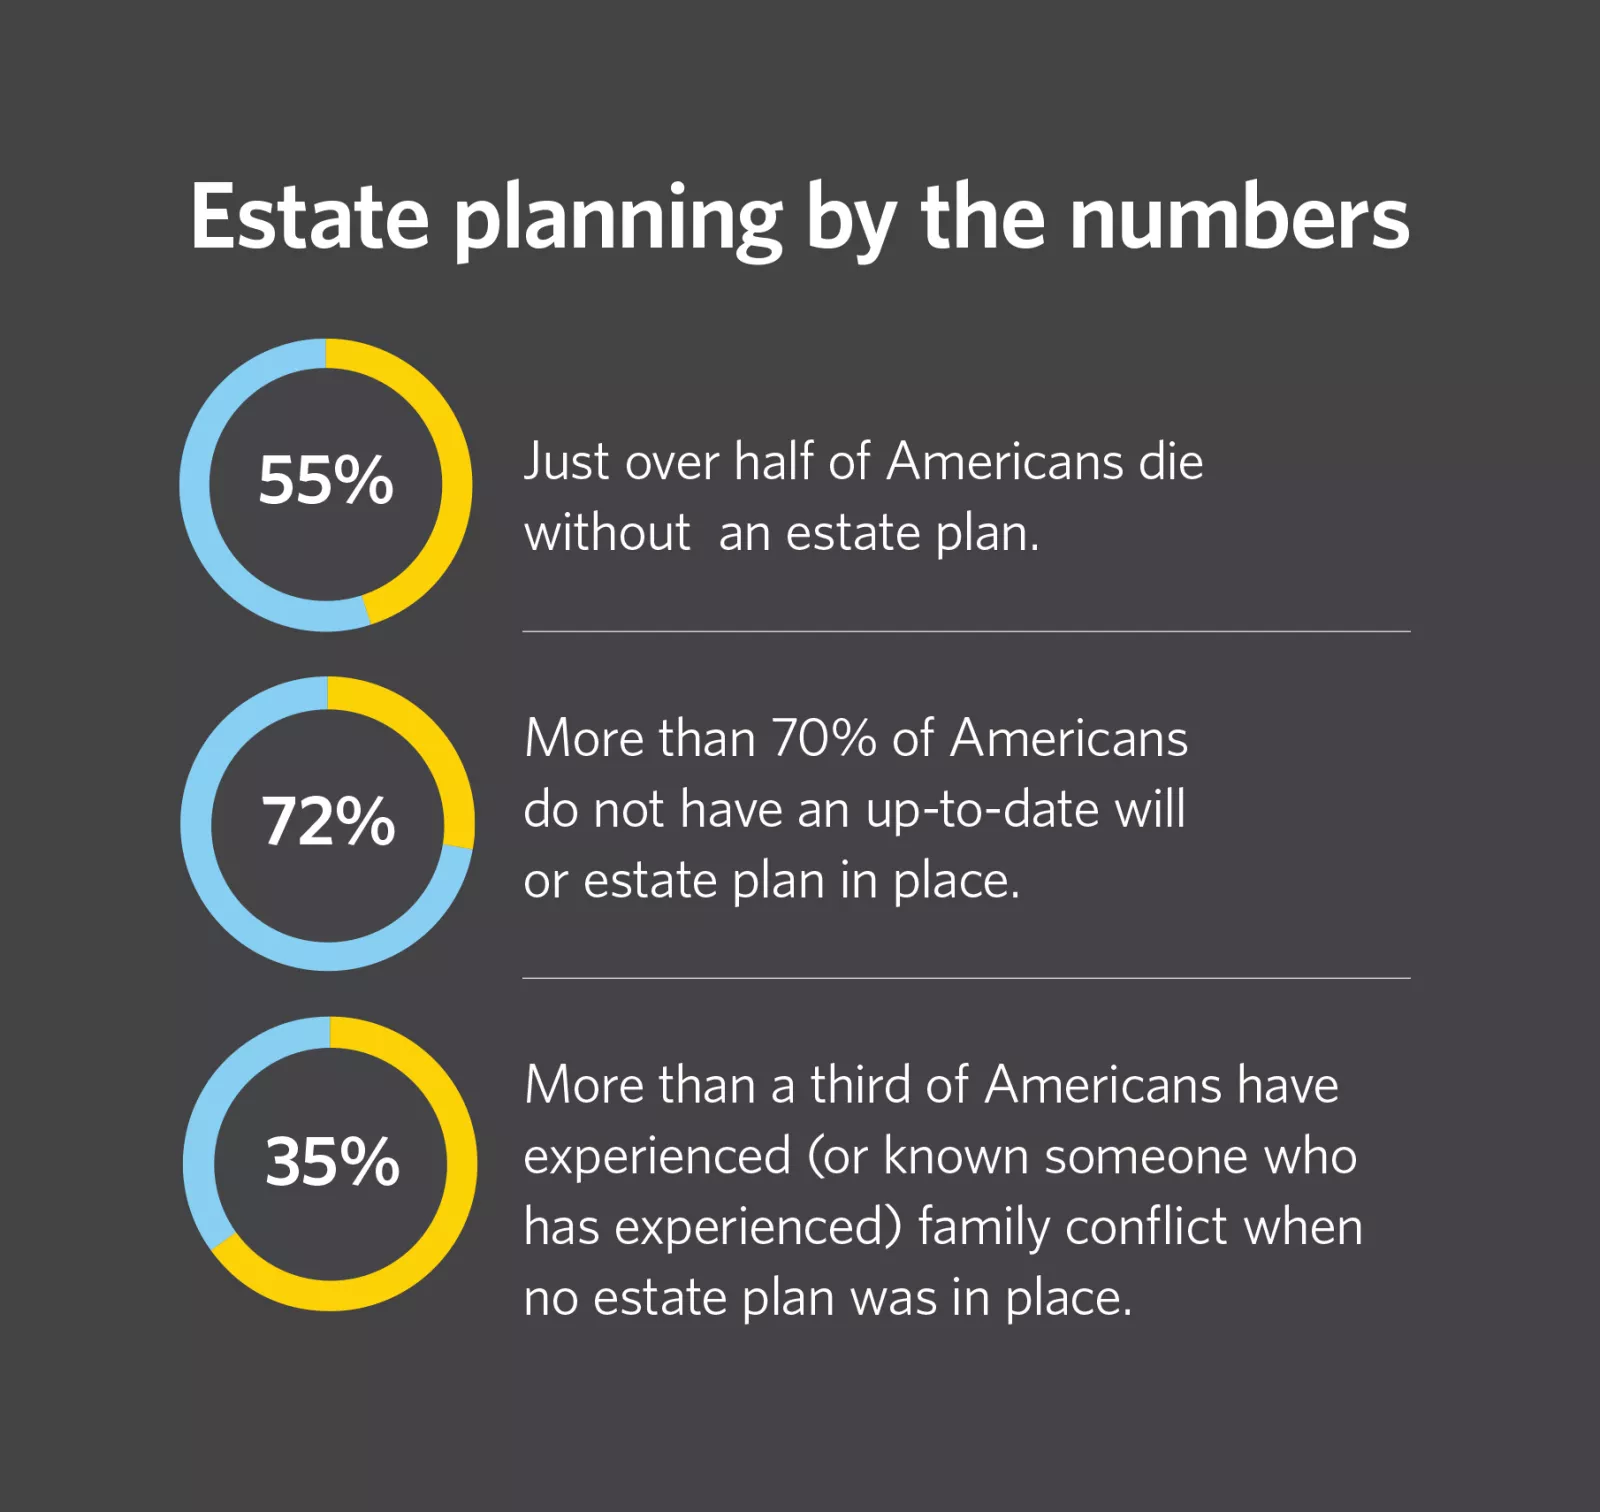  Chart image displaying percentages of Americans without estate plans, or up-to-date wills or estate plans, and who have experienced related conflicts.
